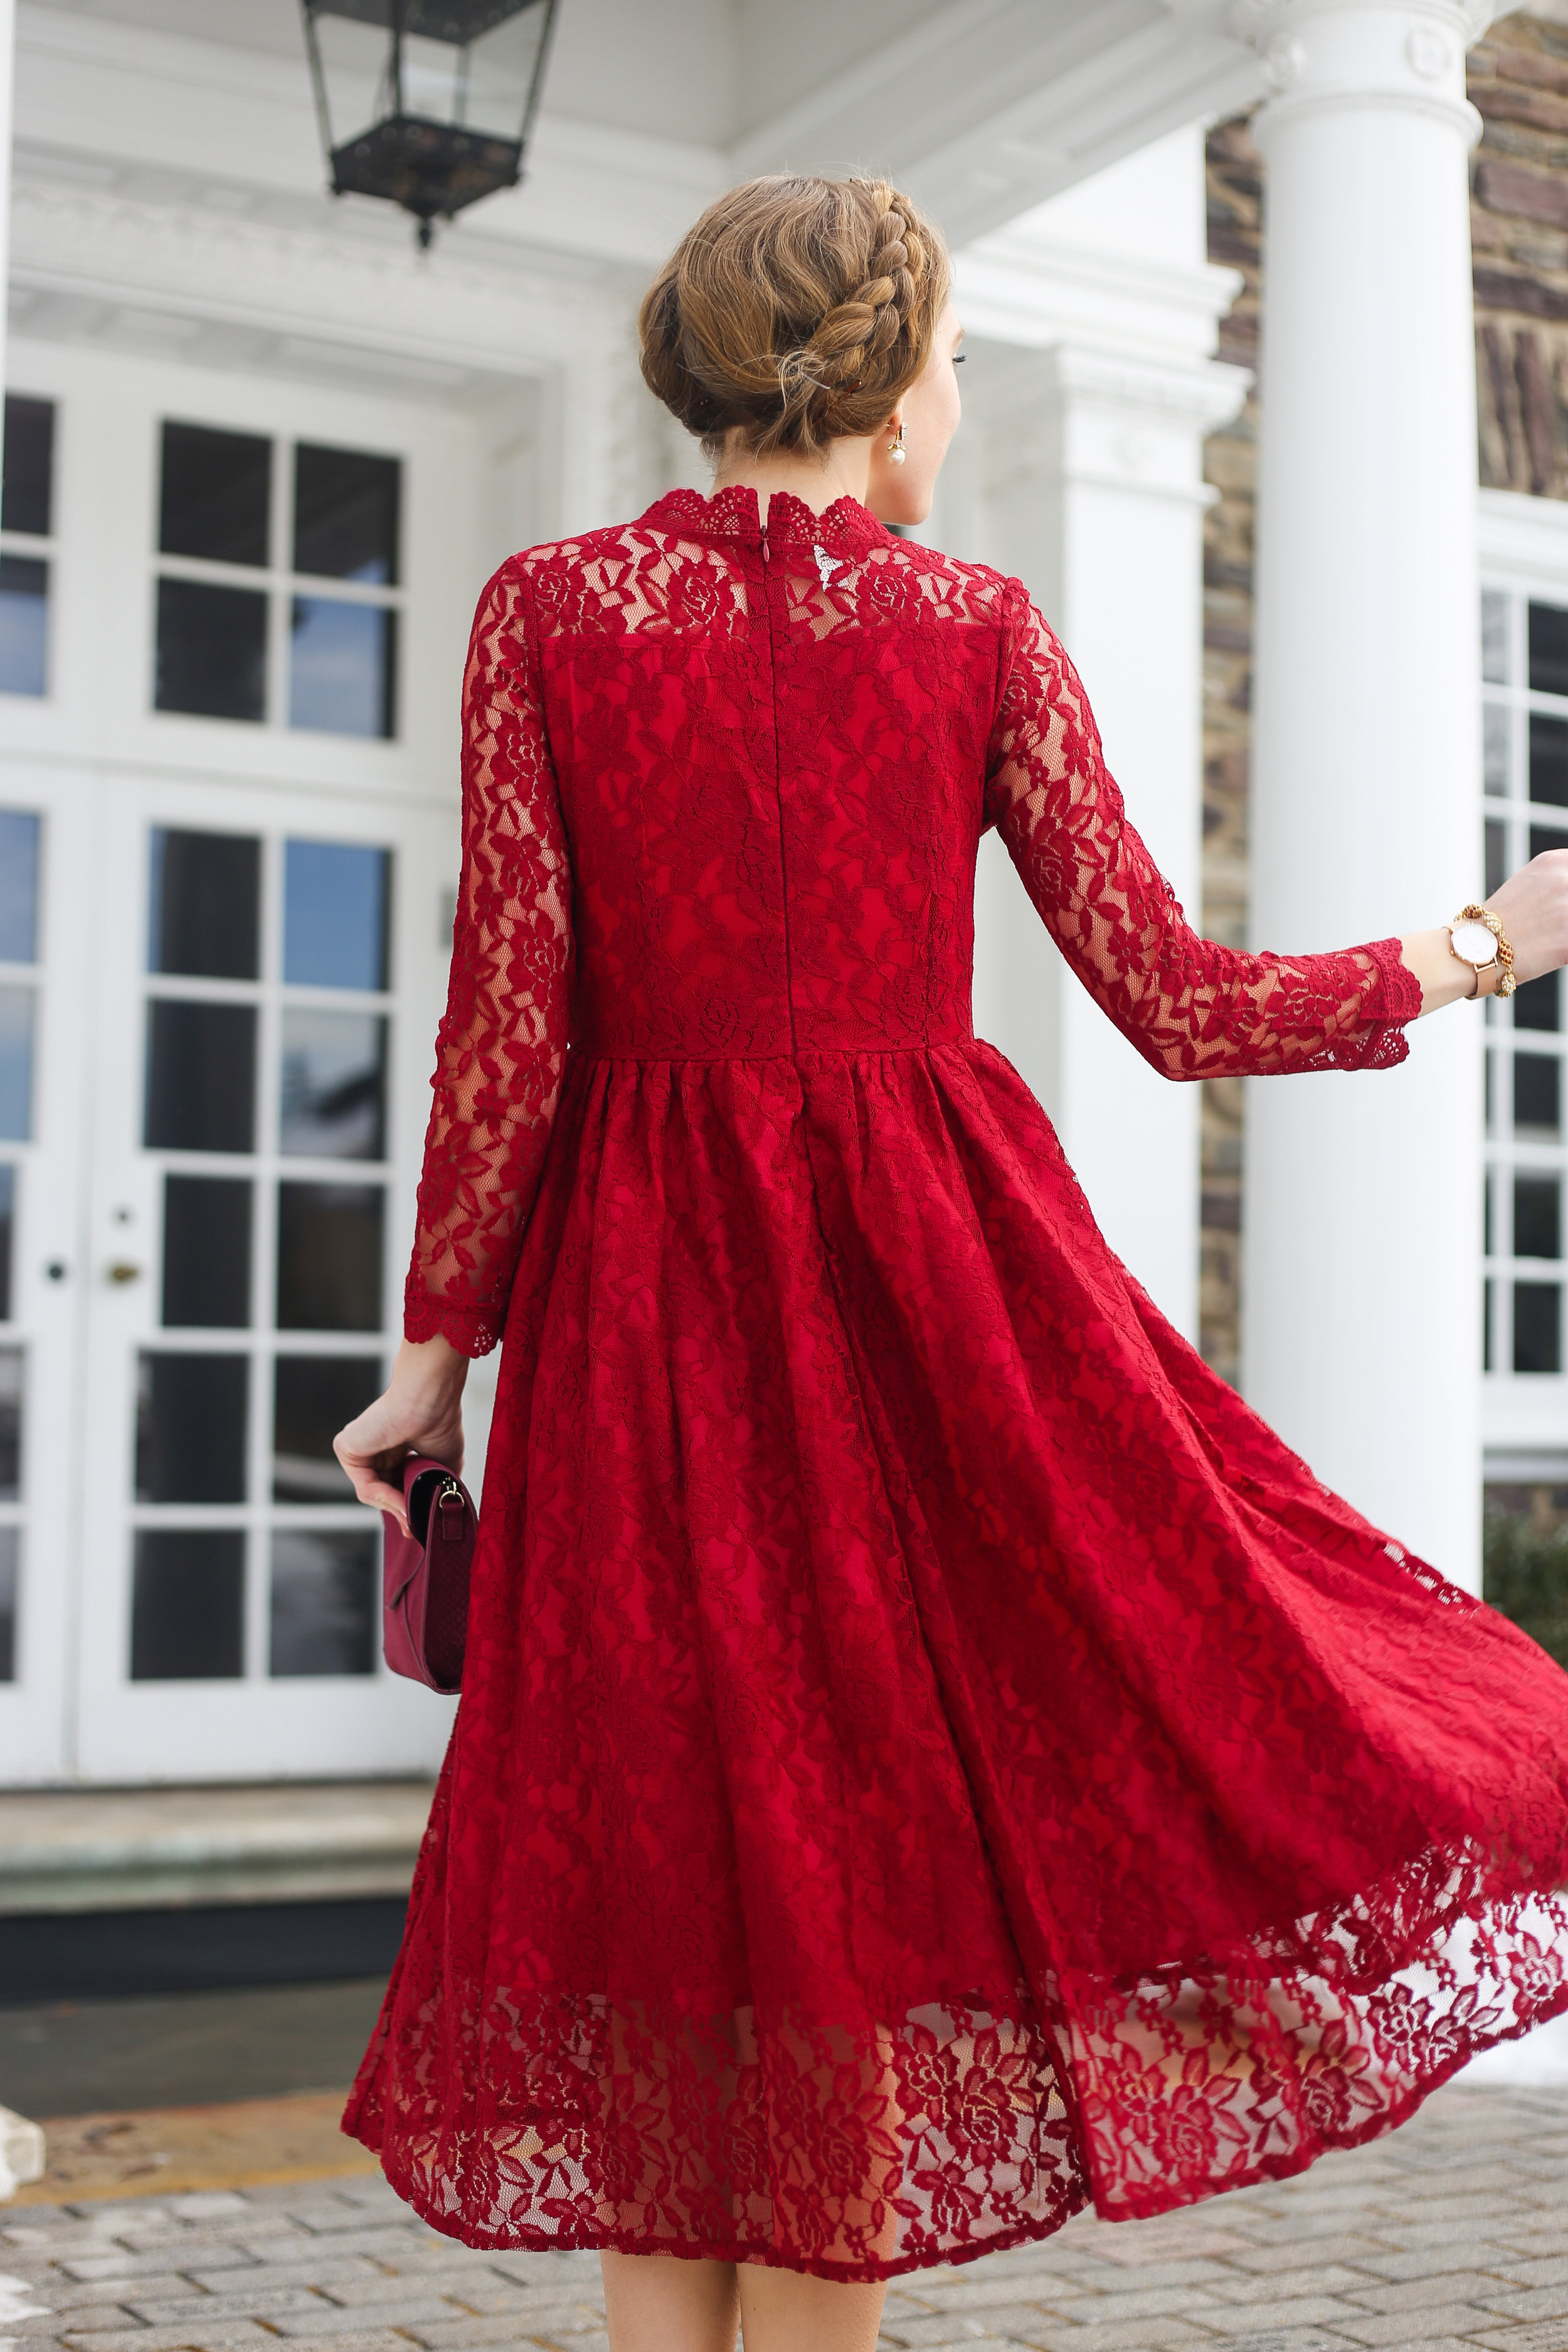 Why a Red Long Sleeved Lace Dress is Perfect for Valentine's Day